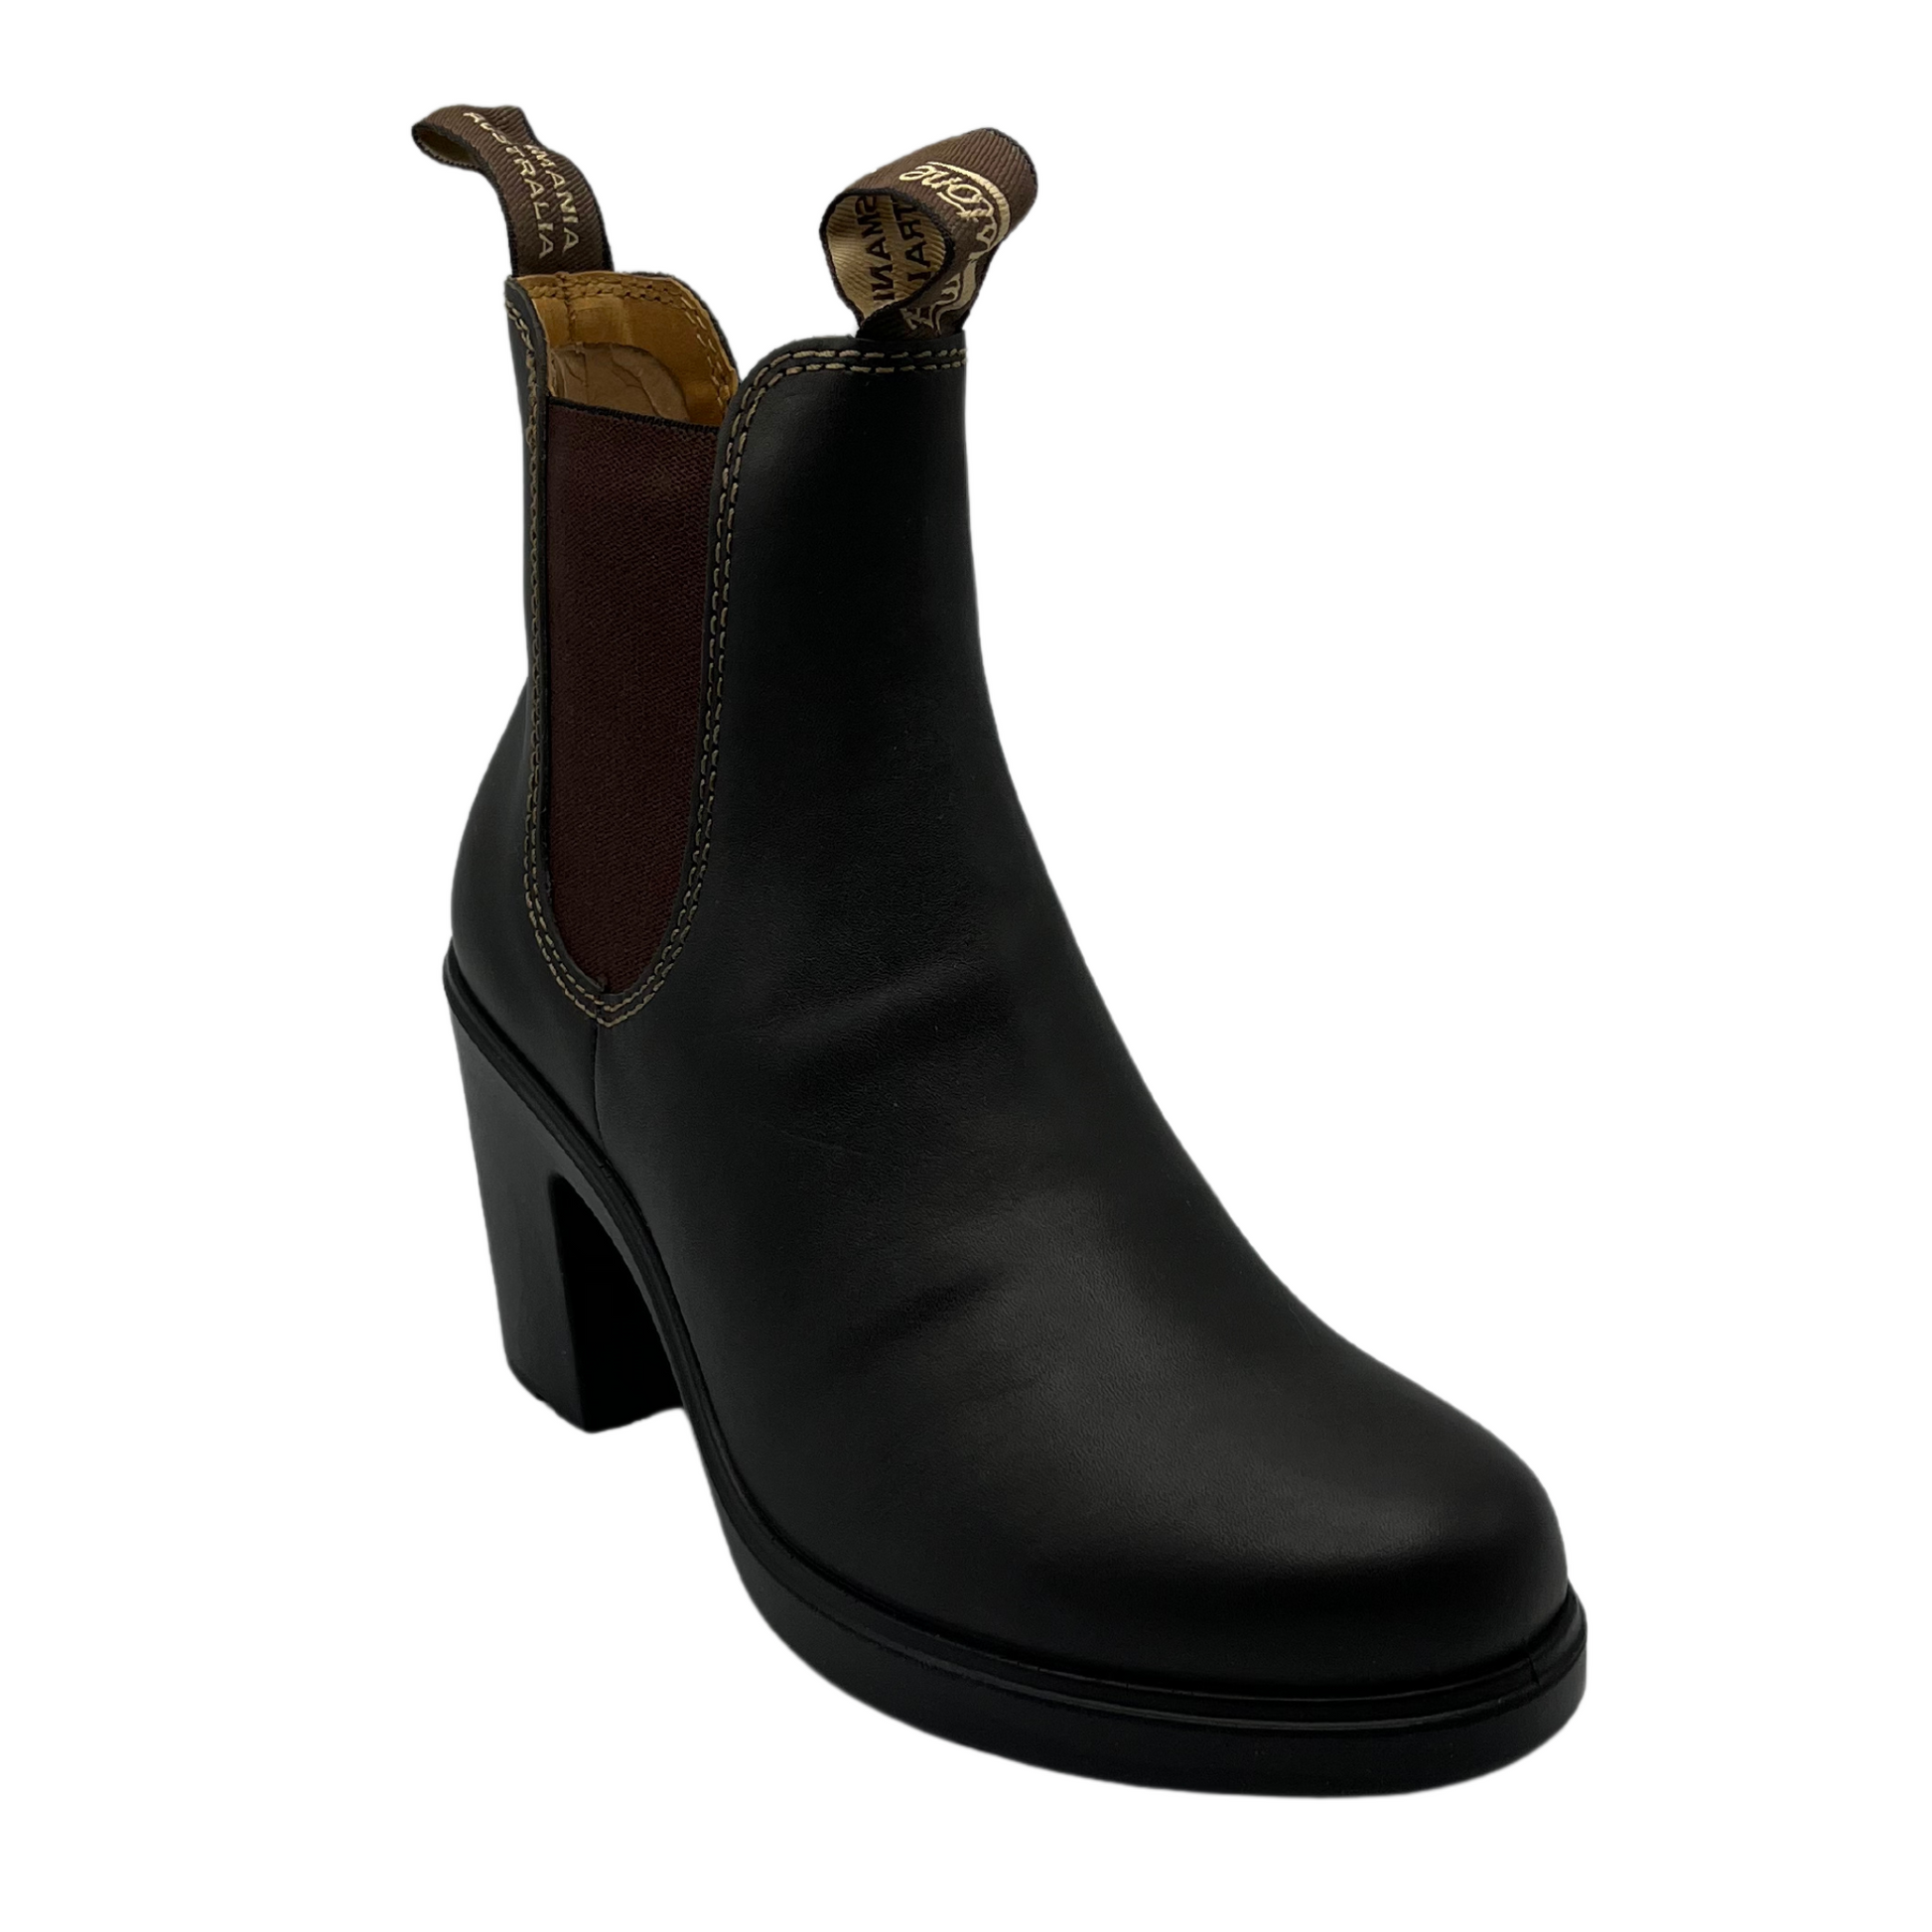 45 degree angled view of stout brown heeled chelsea boot with 3 inch heel